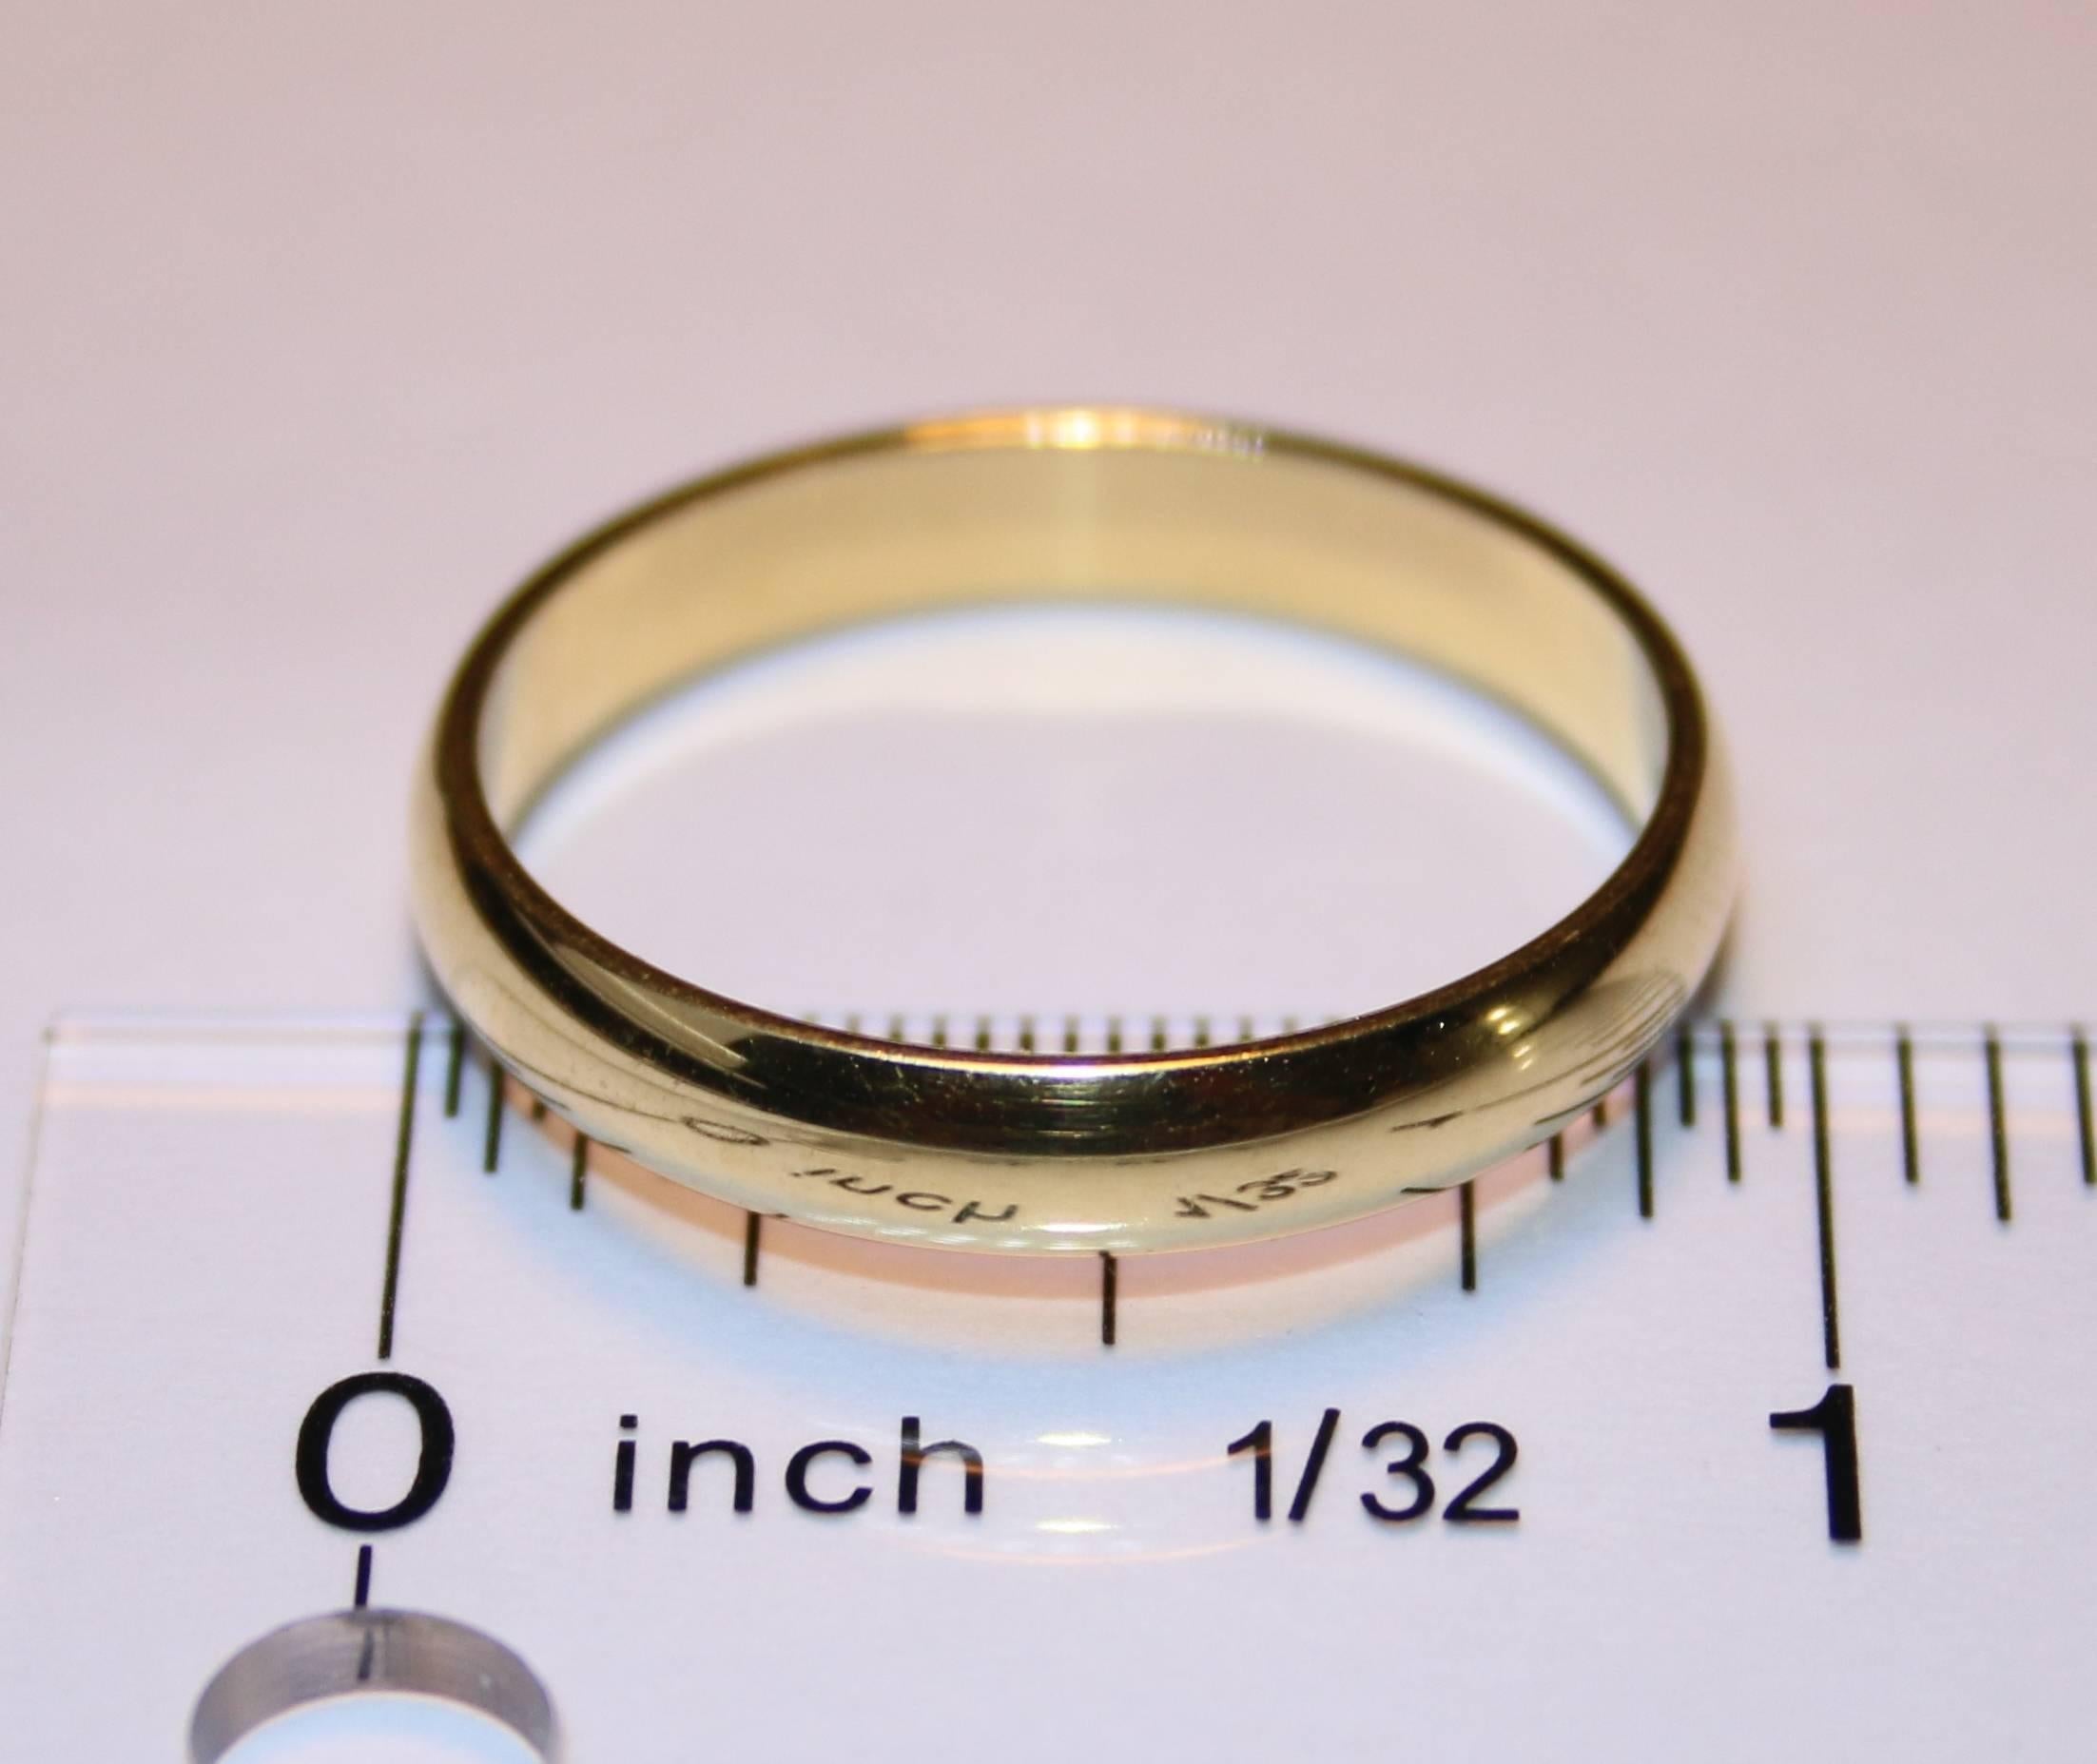 The wedding band is 18K Yellow Gold.
The band is 4.0mm wide.
The ring is a size 12.25, sizable.
The ring weighs 5.1 grams